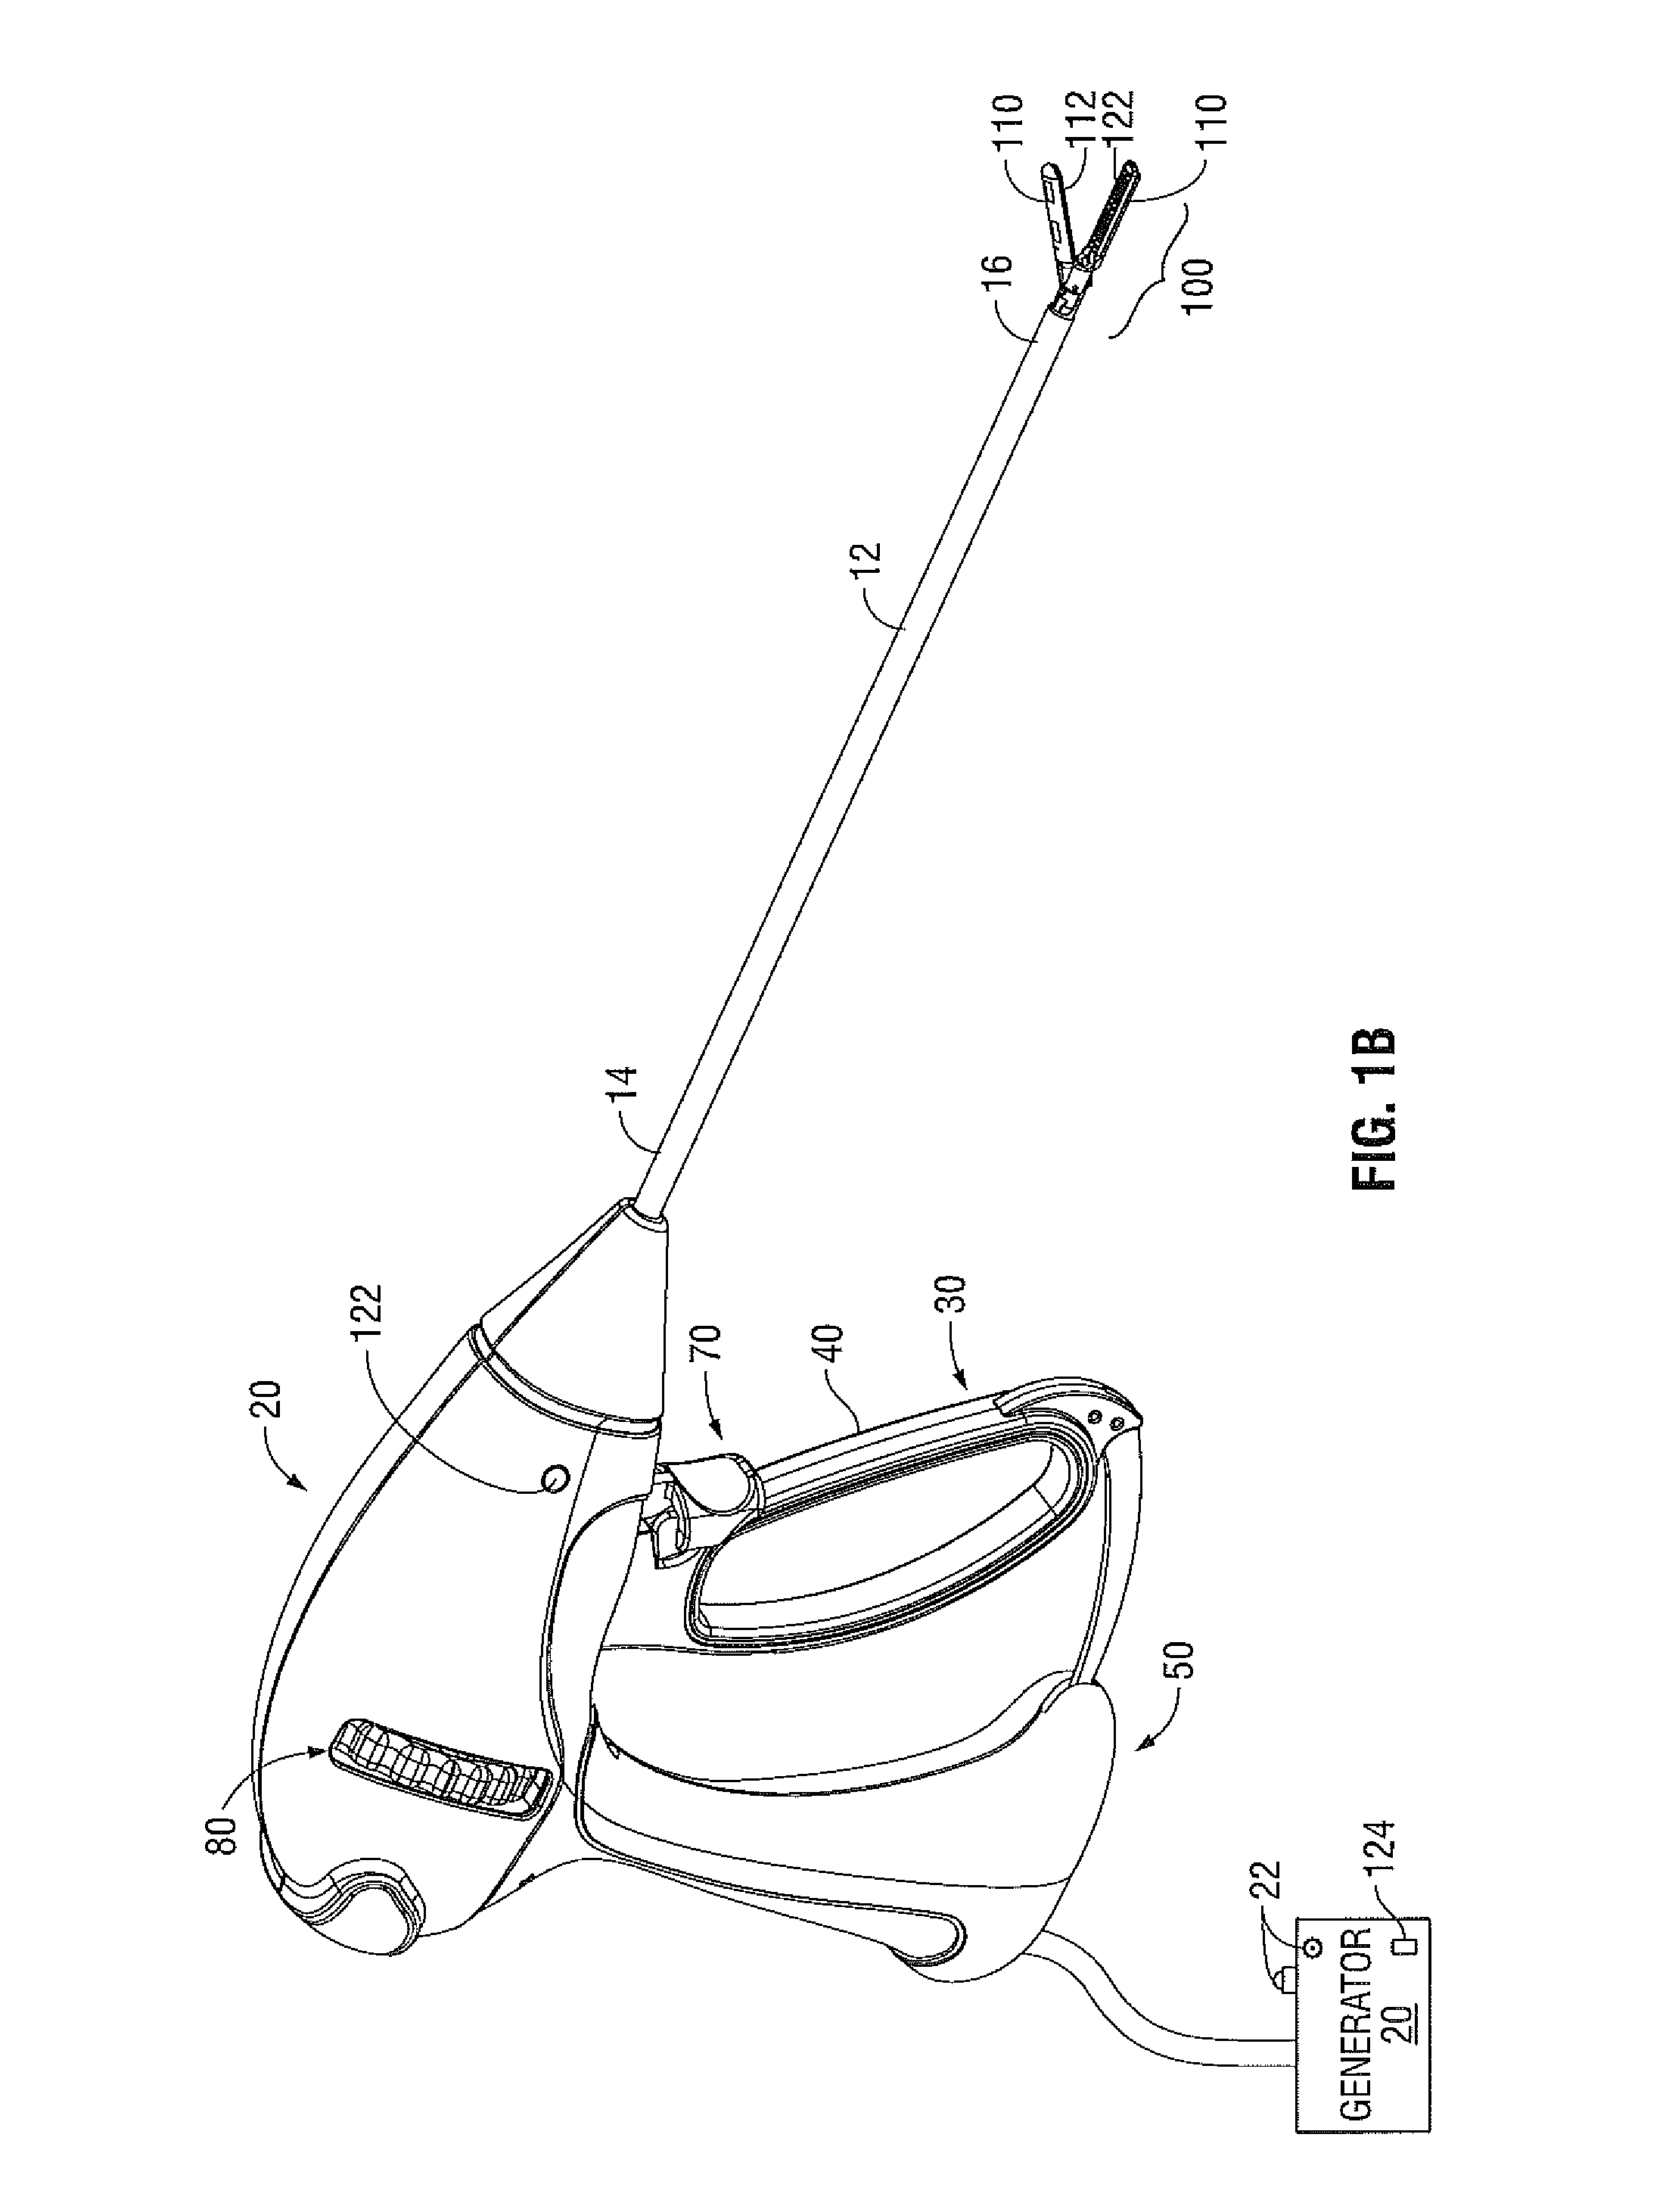 System and Method for Determining Proximity Relative to a Critical Structure